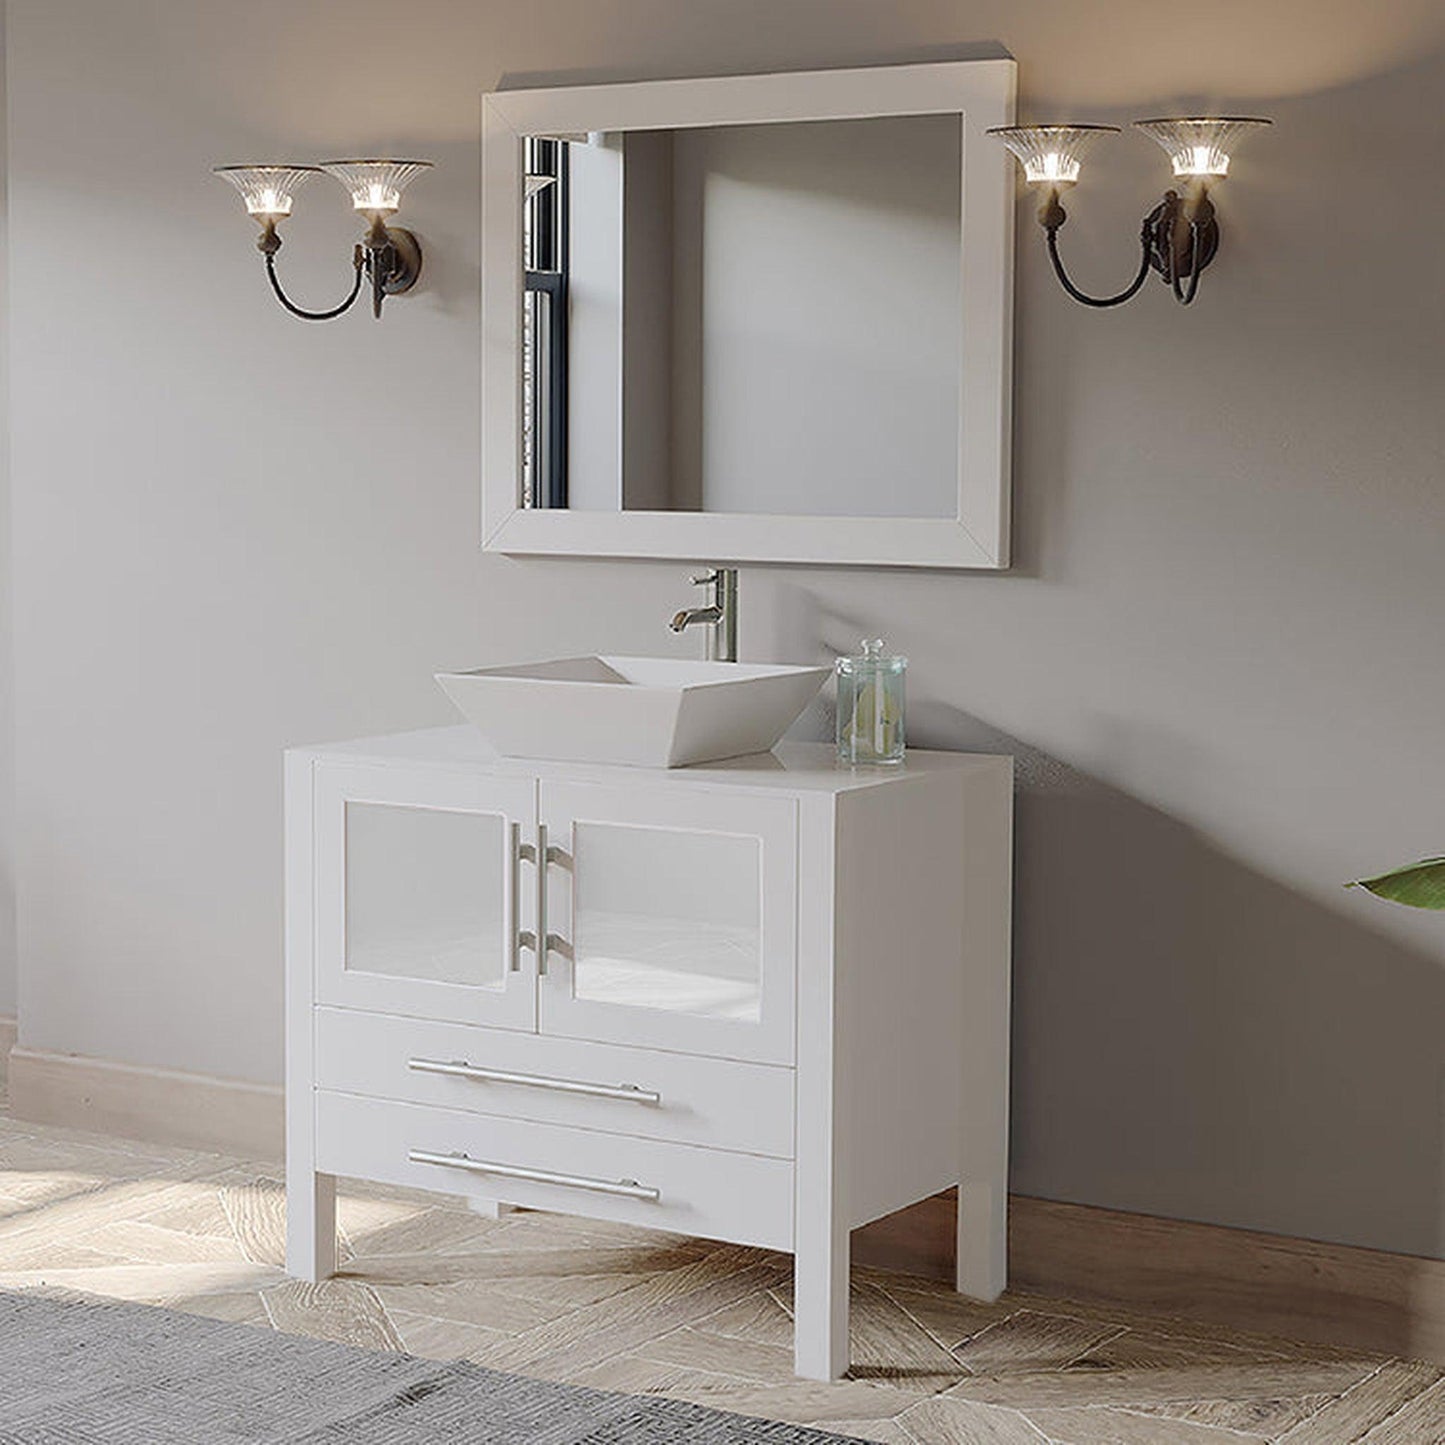 Cambridge Plumbing 36" White Wood Single Vanity Set With Porcelain Countertop And Square Vessel Sink With Polished Chrome Plumbing Finish